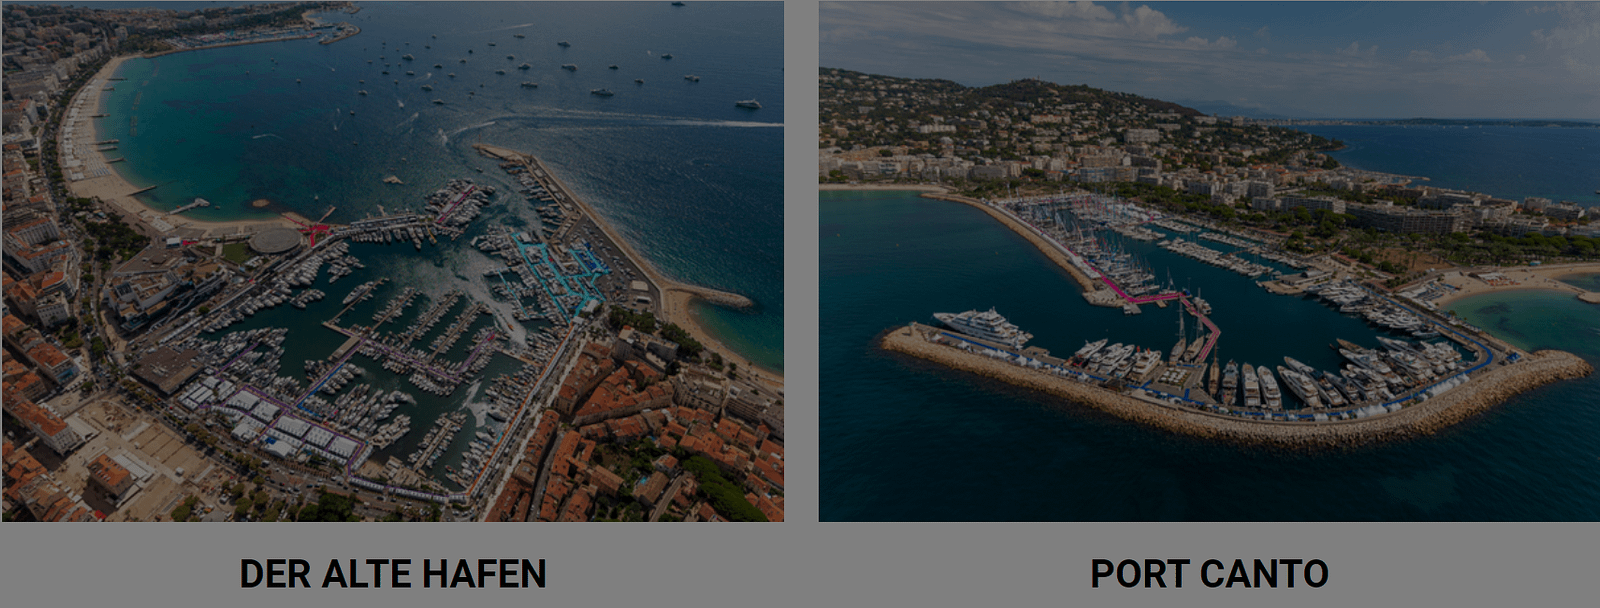 Cannes Yachtfestival 2022